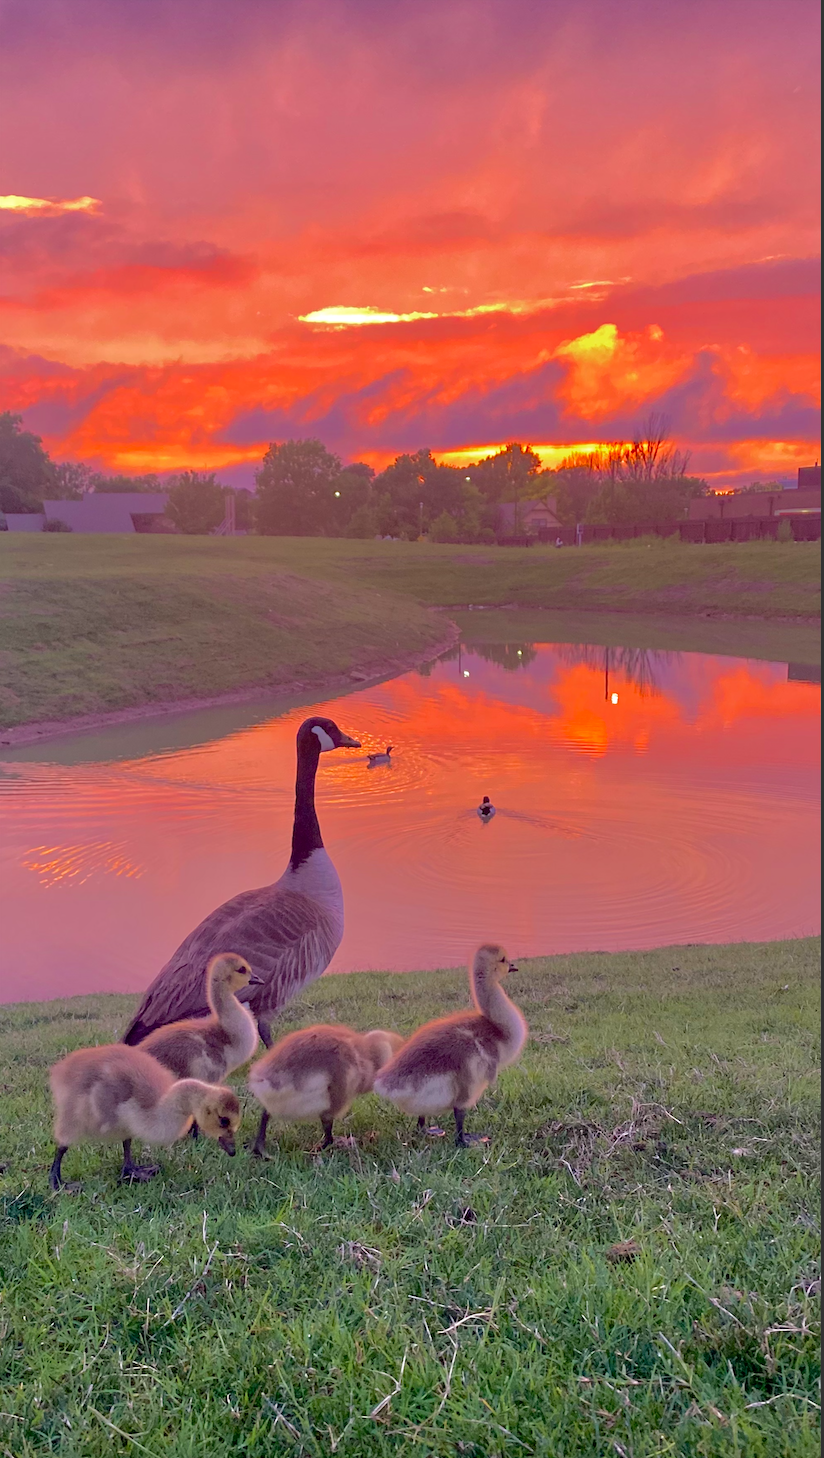 Geese against red sunset.